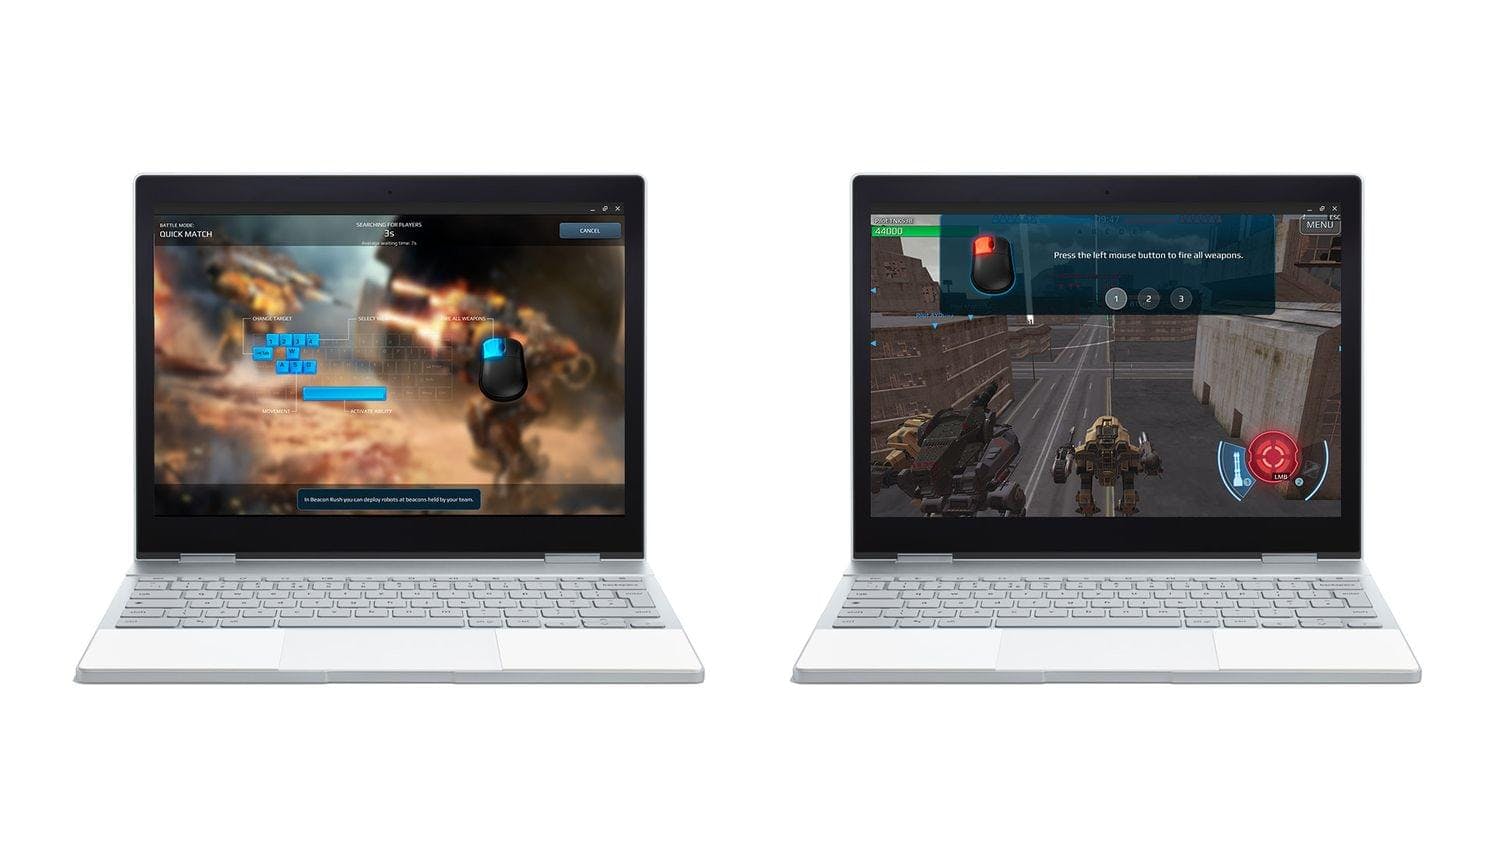 Two laptop computers showing War Robots gameplay with keyboard and mouse input.